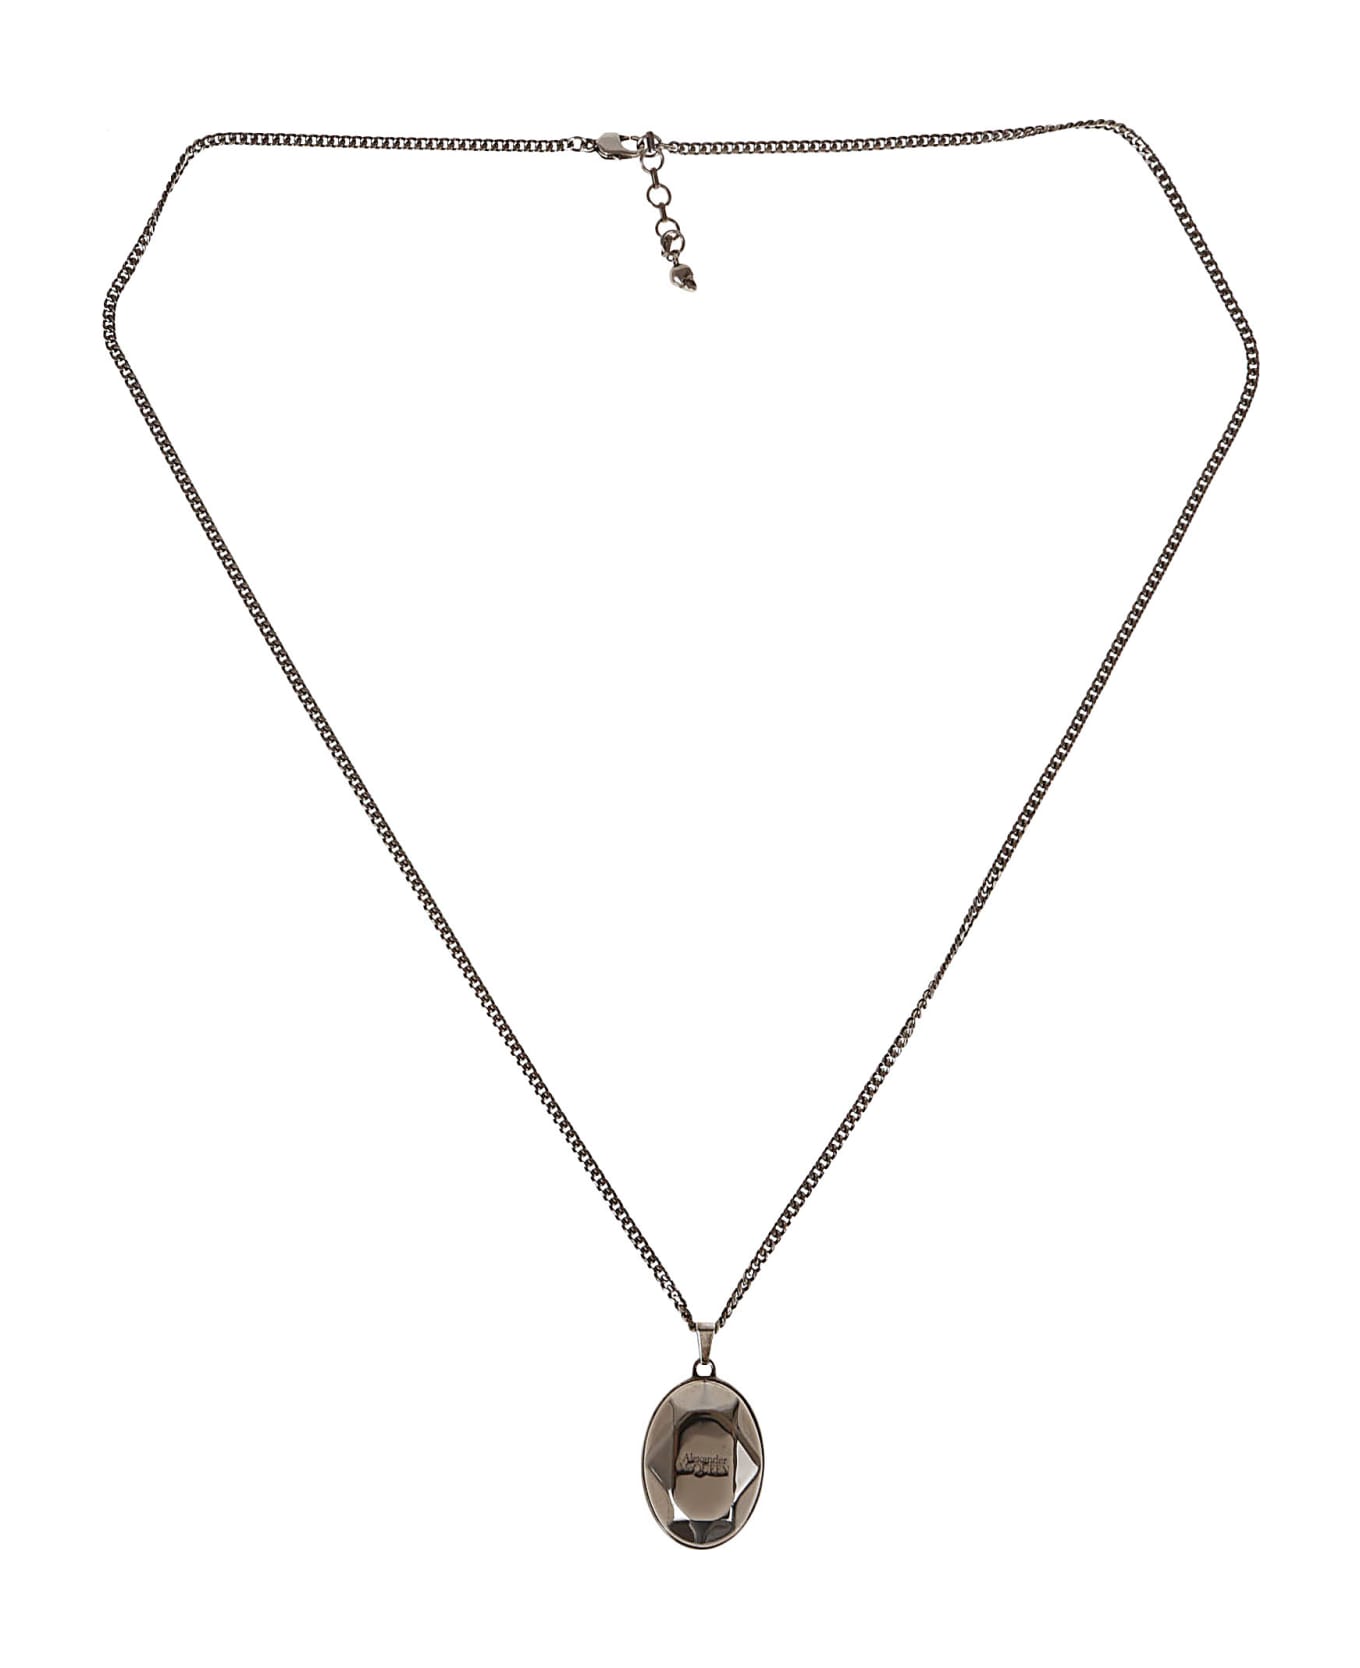 Alexander McQueen Faceted Stone Necklace - Sil V B Antil